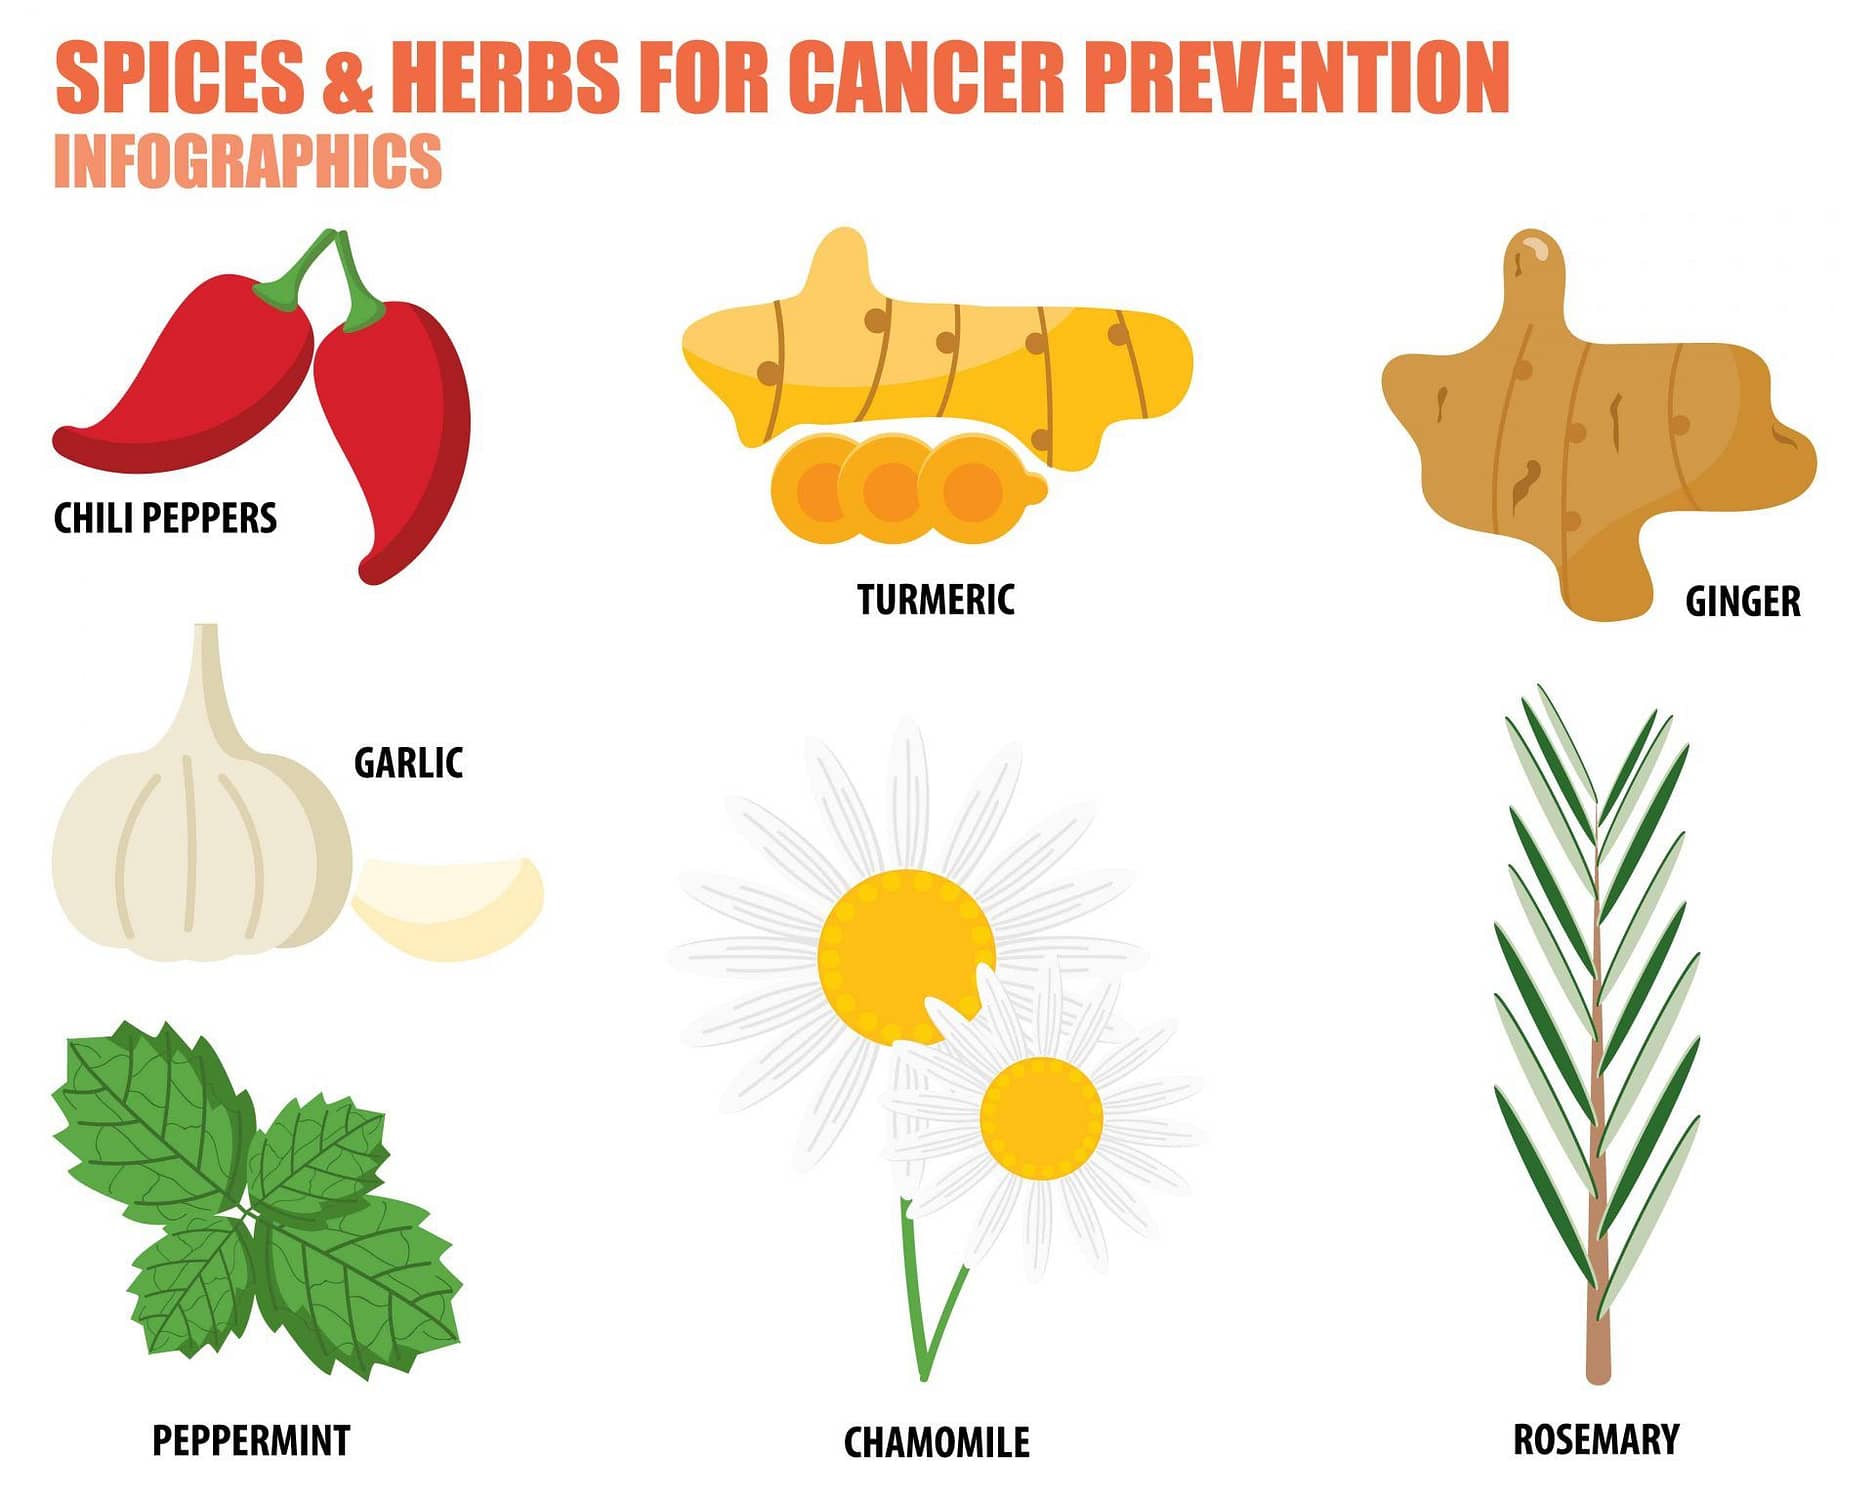 Turmeric and other cancer fighting herbs and spices infographic